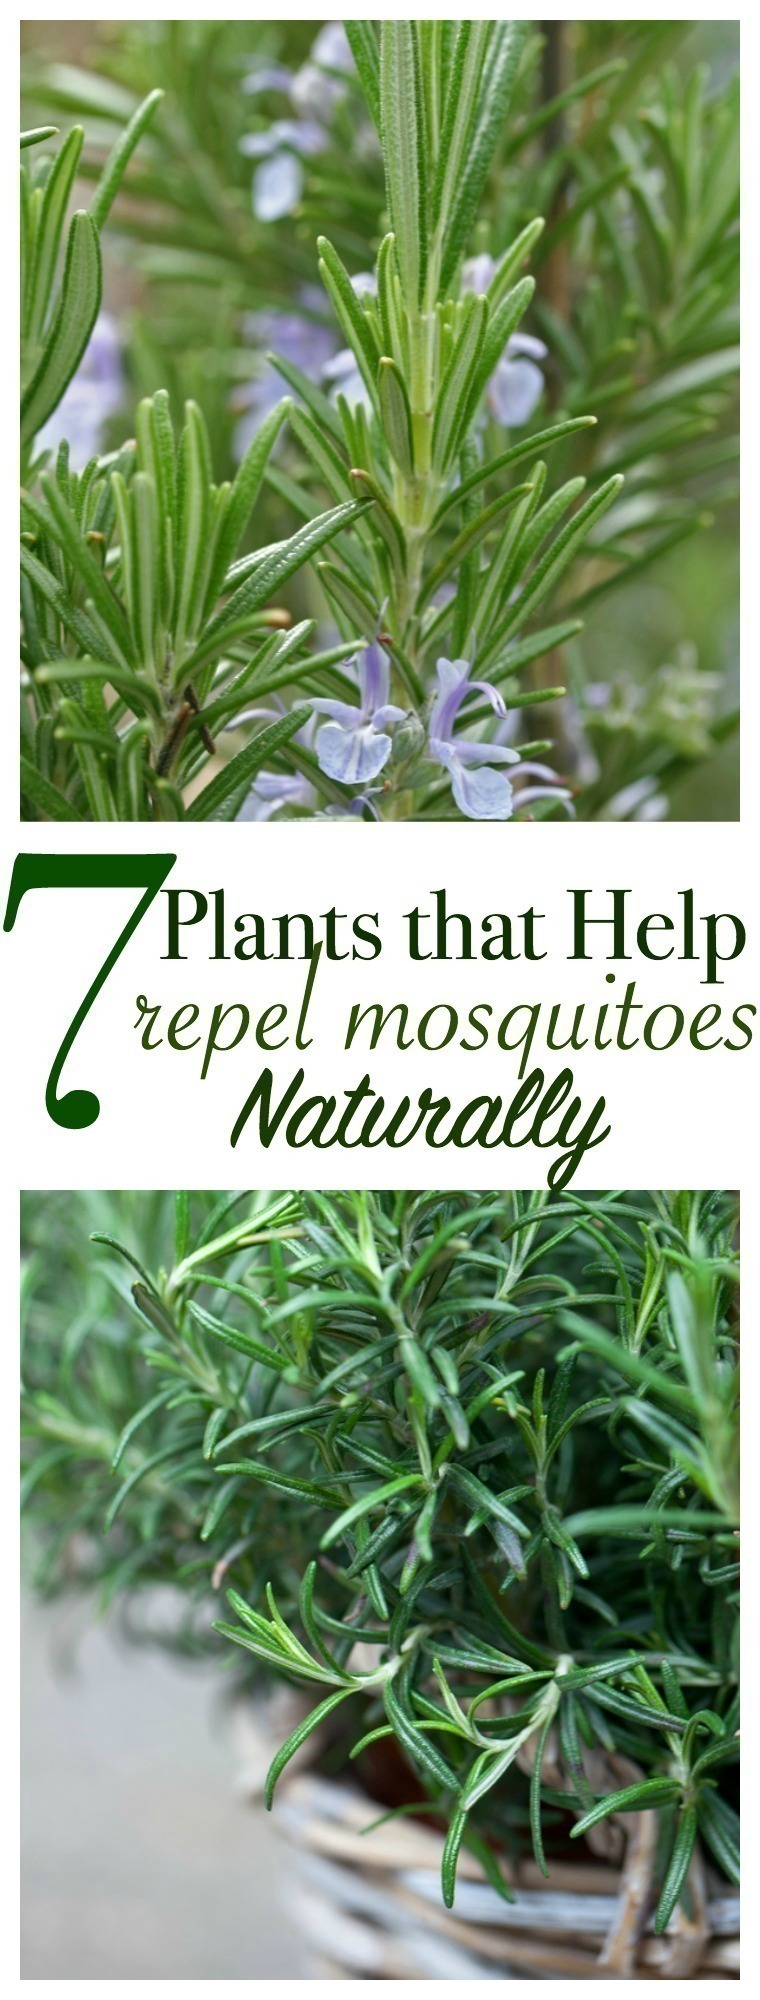 Grow a garden full of your own natural pest control with these plants that repel mosquitoes naturally. Here are 7 mosquito-repelling plants that you need in your backyard ASAP.